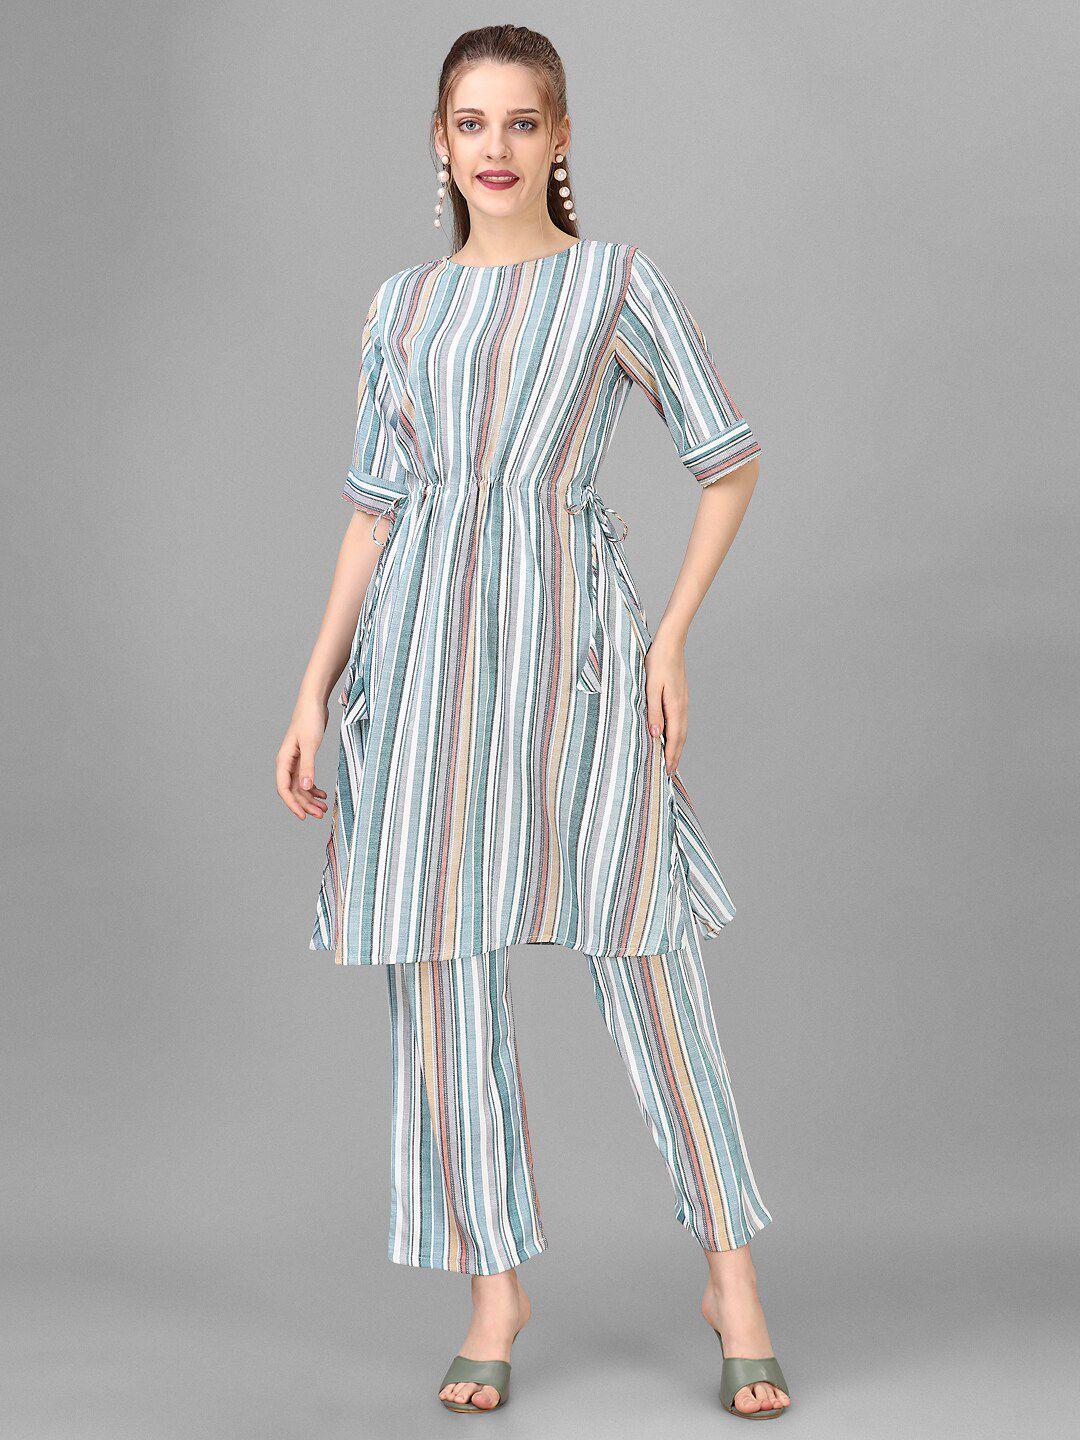 house of mira striped tunic & trouser co-ord set